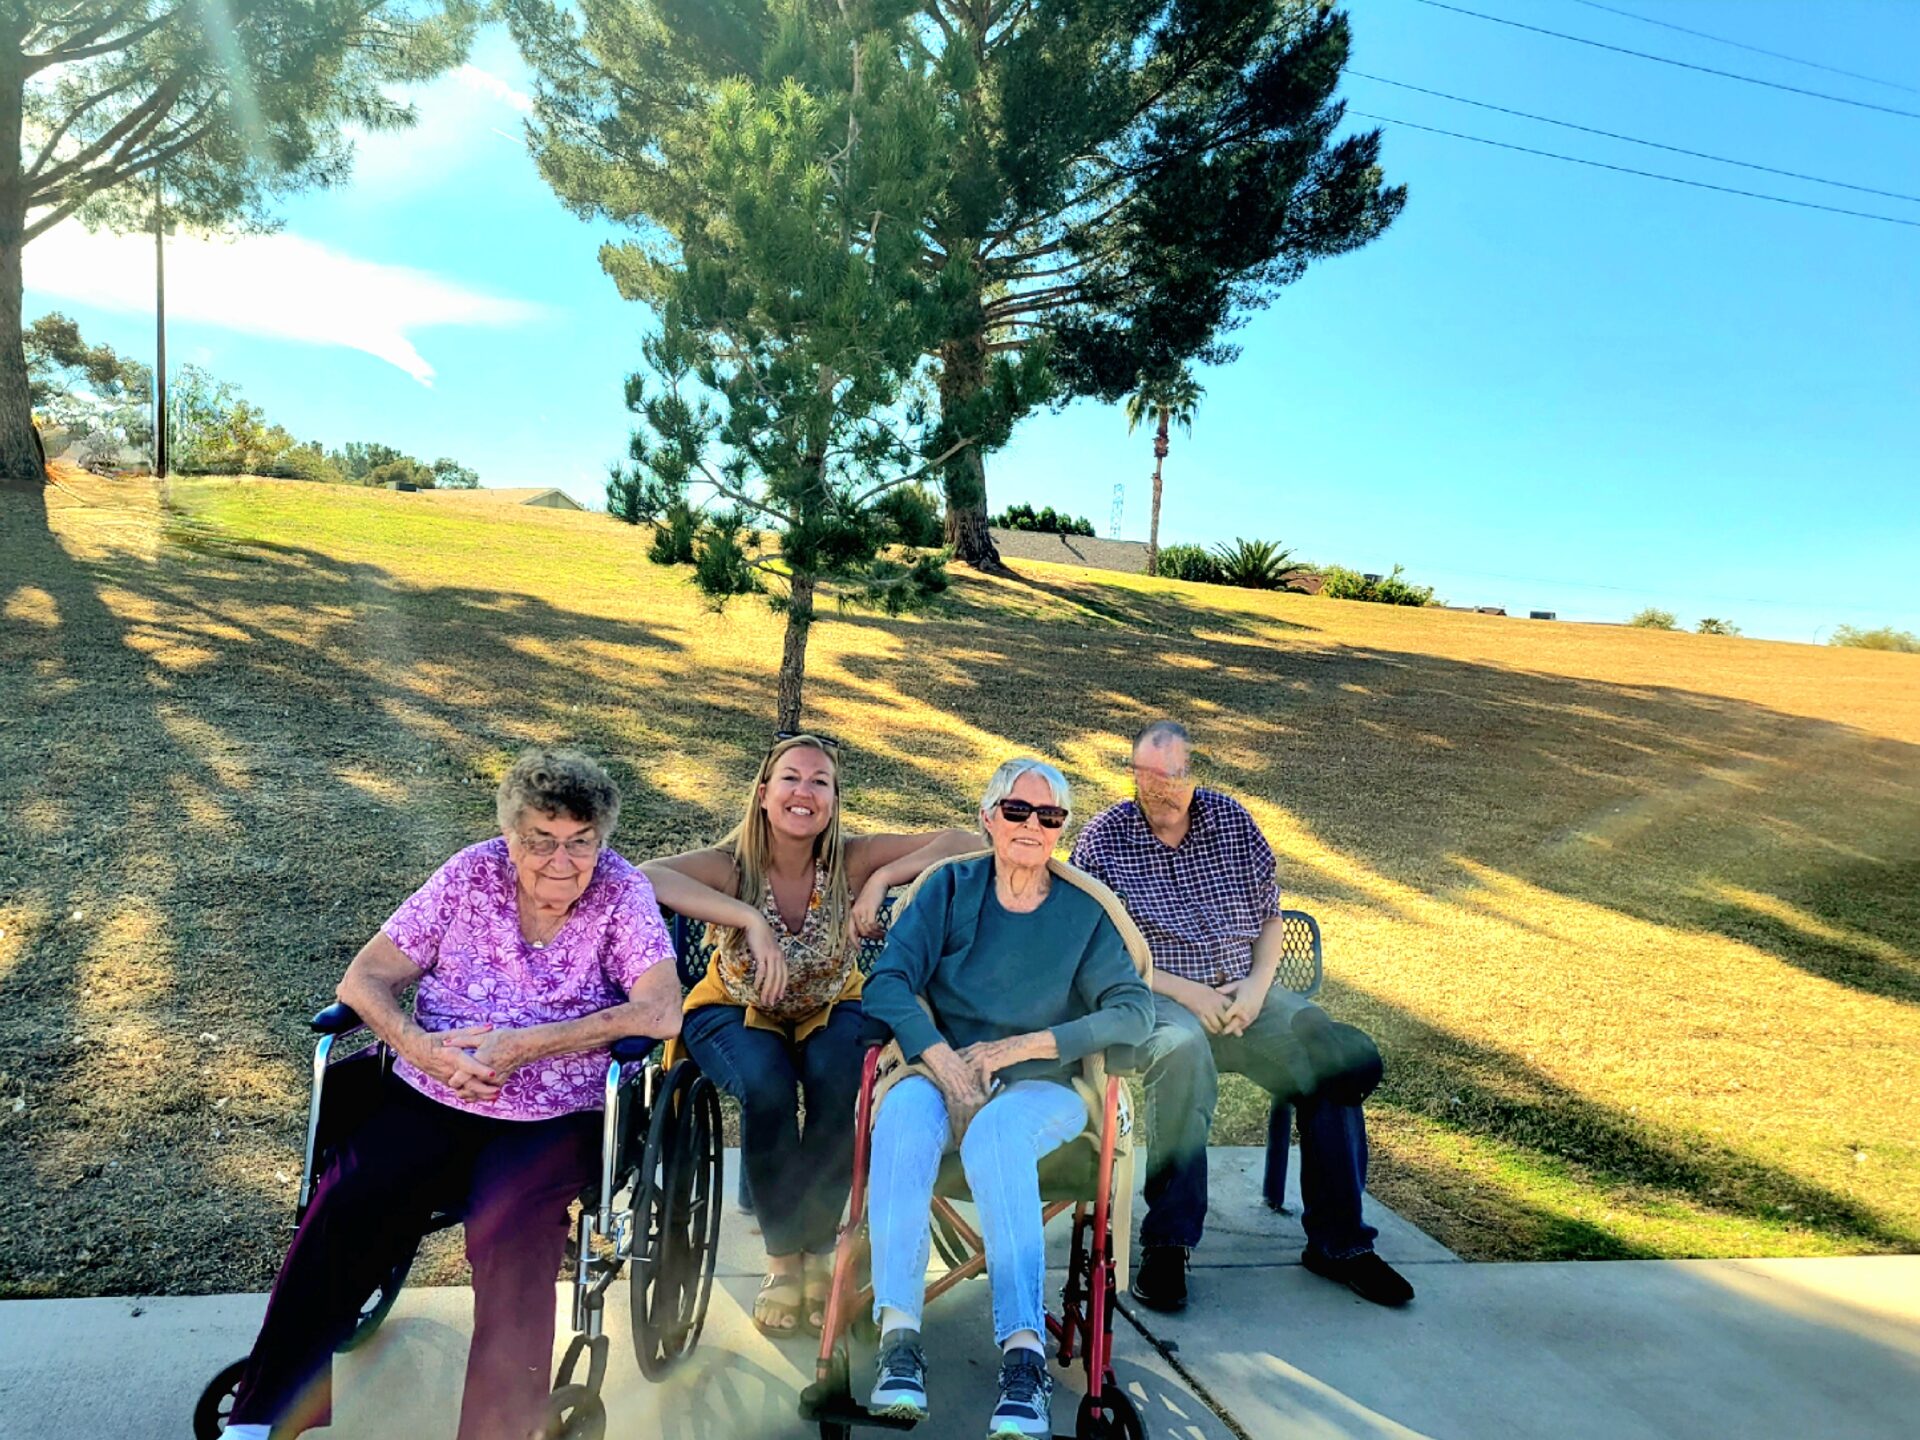 group of people sitting on chair and posing for a picture at the park